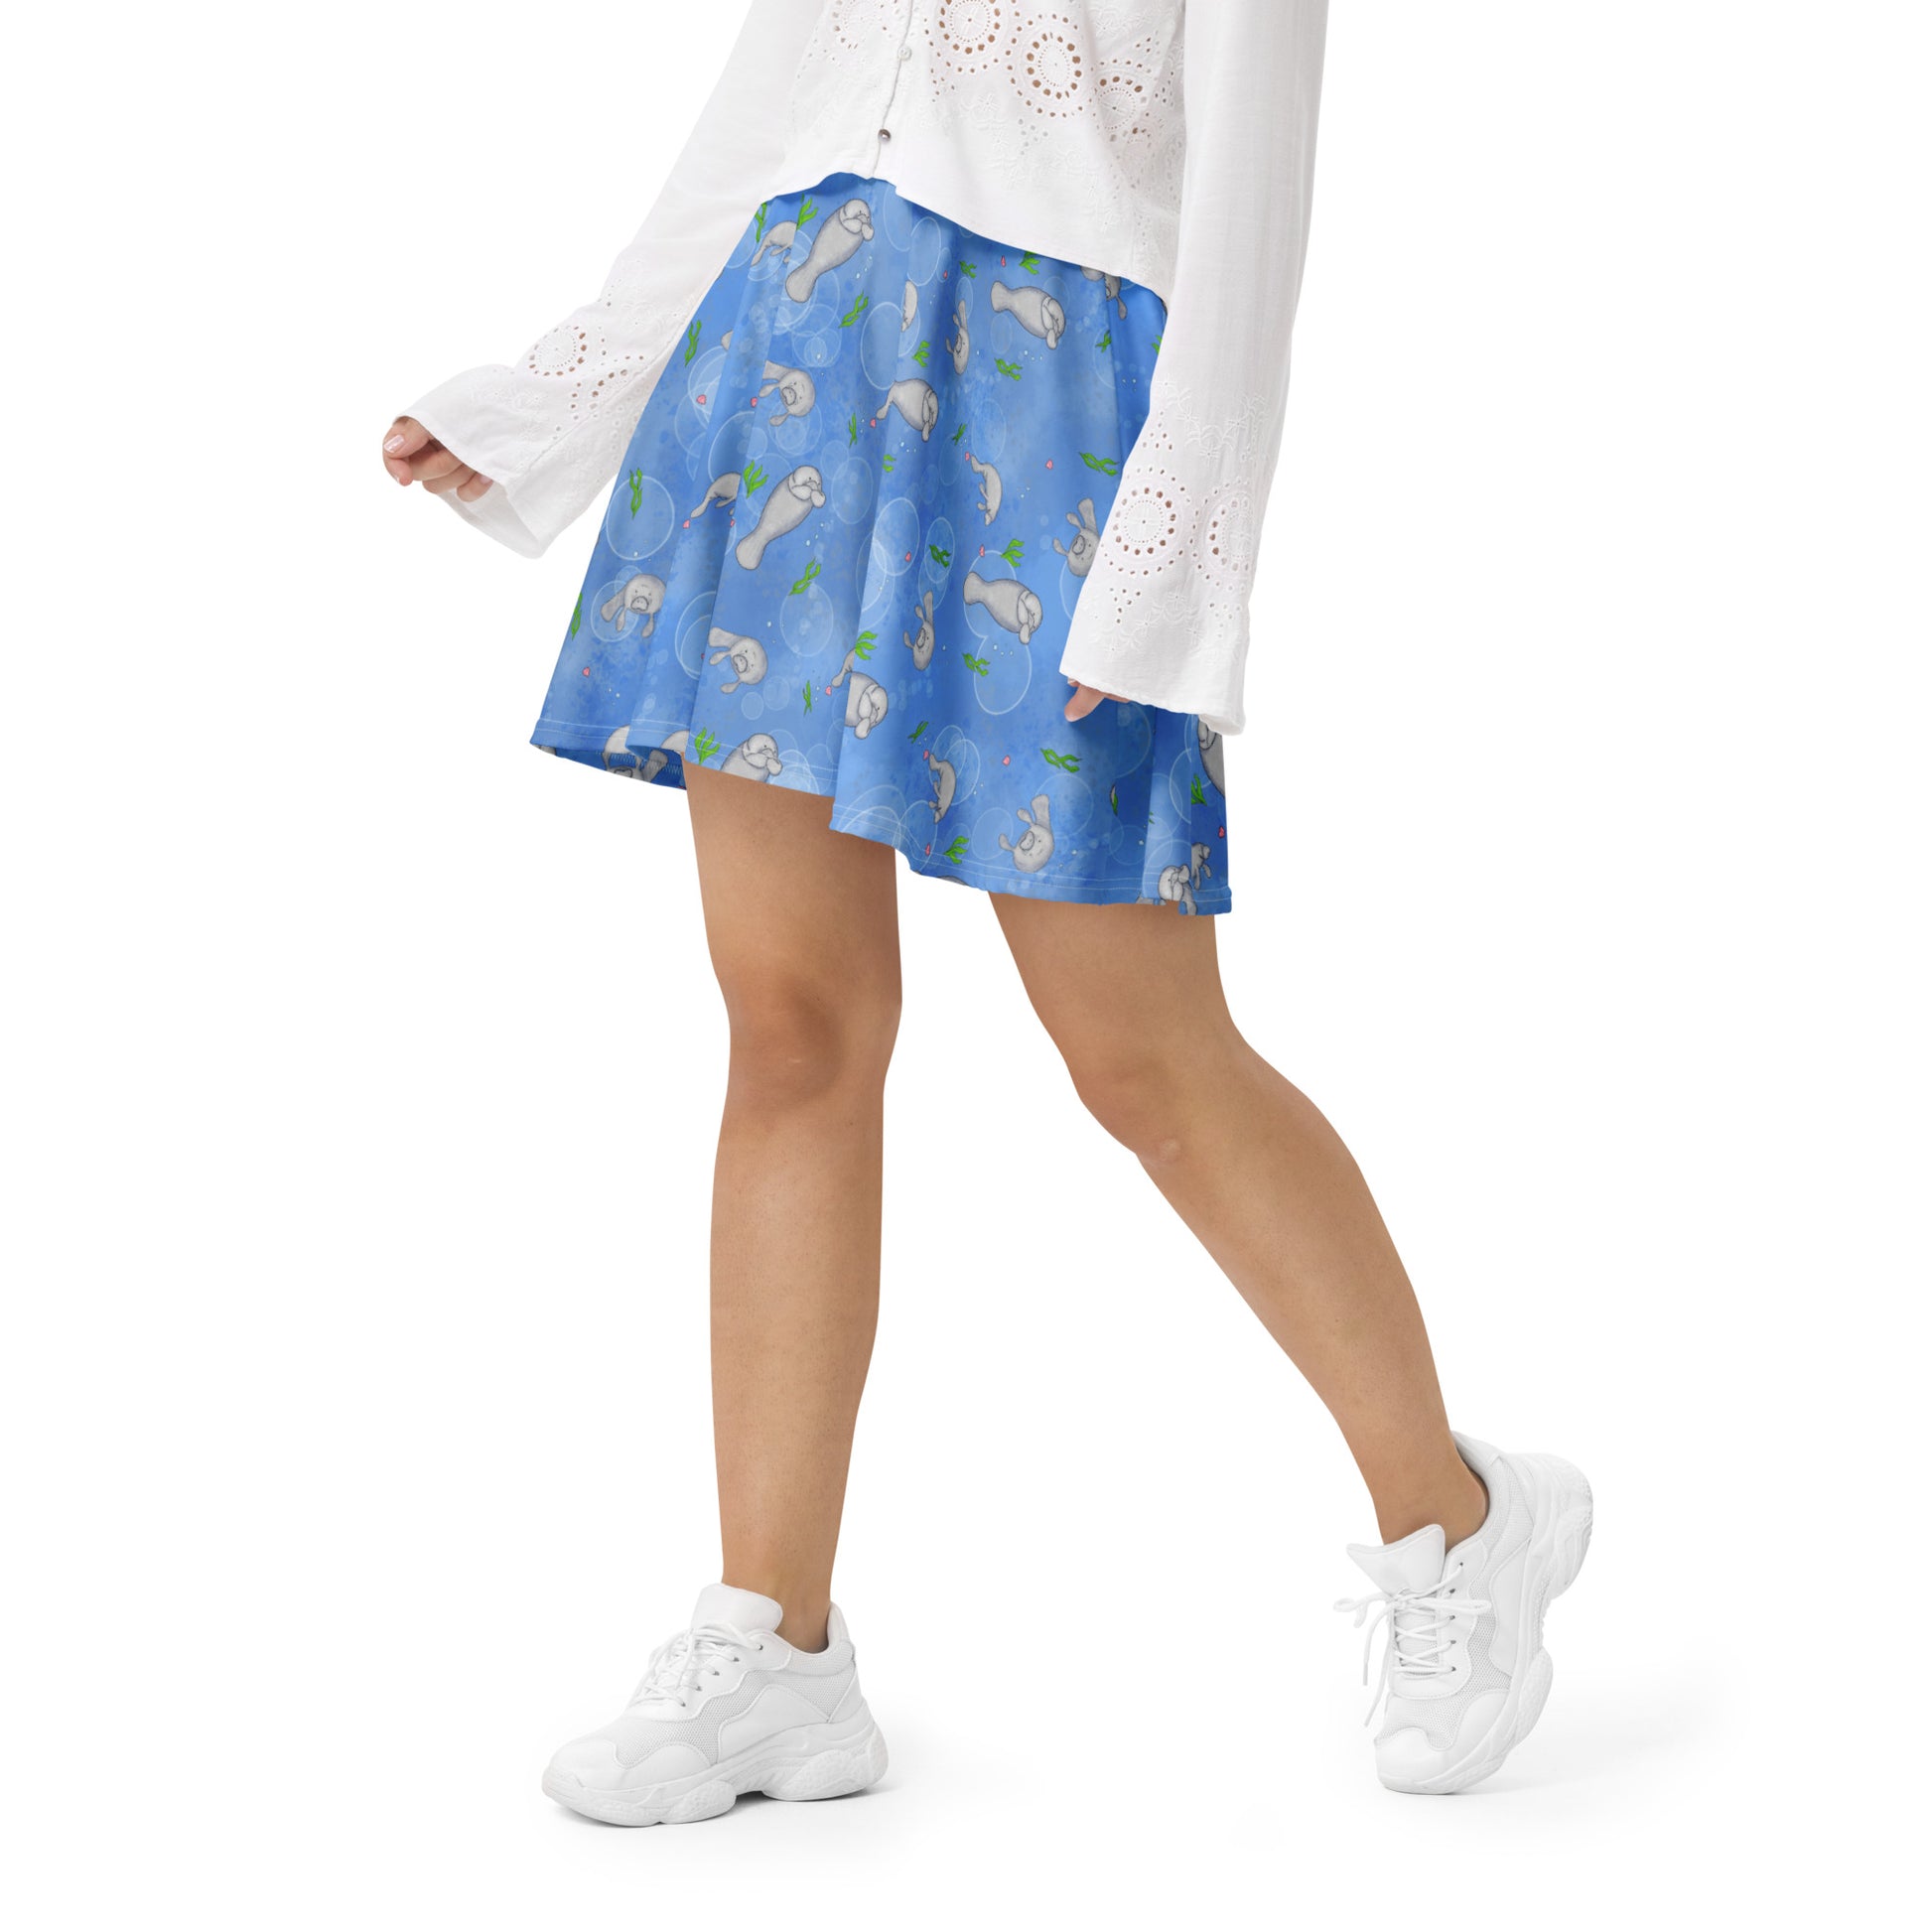 Manatee patterned skater skirt with elastic waist and mid-thigh length skirt. Has a pattern of manatees, seashells, seaweed and bubbles on a blue background. Shown on female model with white sweater and shoes.